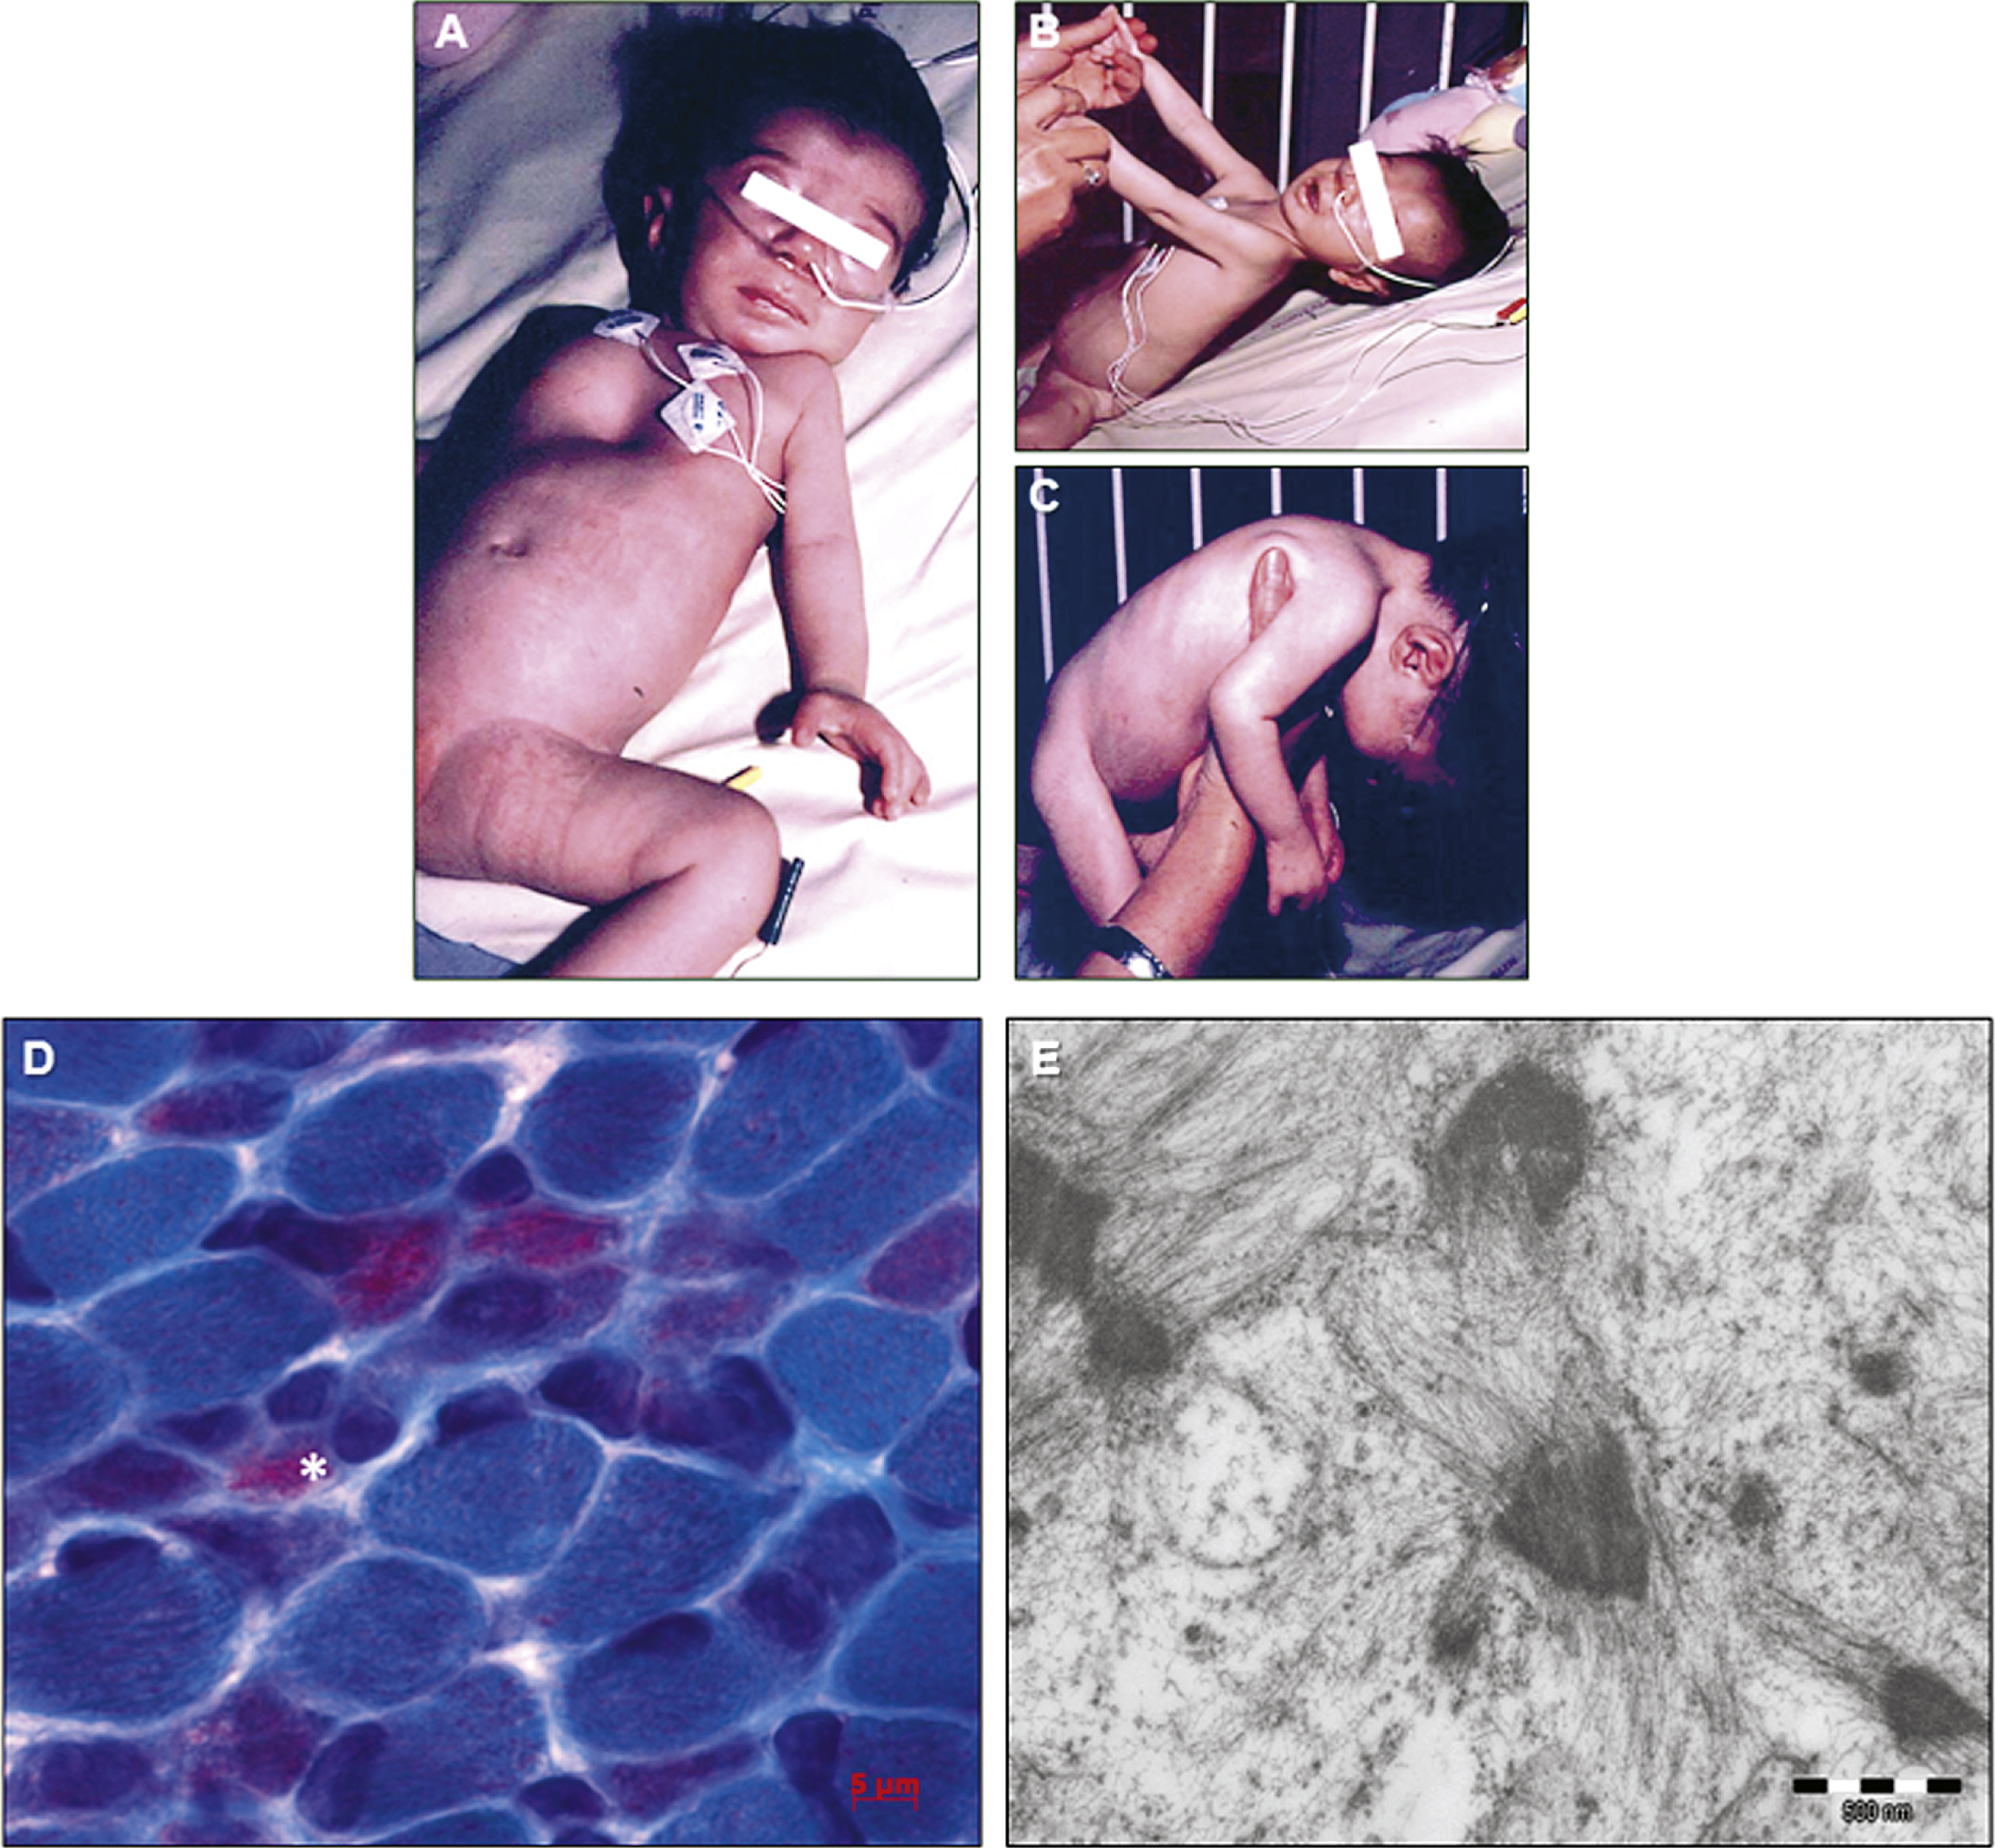 Clinical and histological features of the nemaline myopathy patient. A) Clinical examination of the patient revealed a floppy infant with pectus excavatum, and severely reduced active movements. B) The patient showed severe axial muscle weakness, and C) absence of antigravity reflexes, impossible neck extension or brief head control. D) Modified Engel-Gomori trichrome staining revealed the presence of marked fiber size variation, and the presence of nemaline bodies in 40-50% of fibers. The asterisk indicates a severely atrophic fiber filled by minirods.E) Electron microscopy confirmed the presence of small nemaline bodies (minirods).